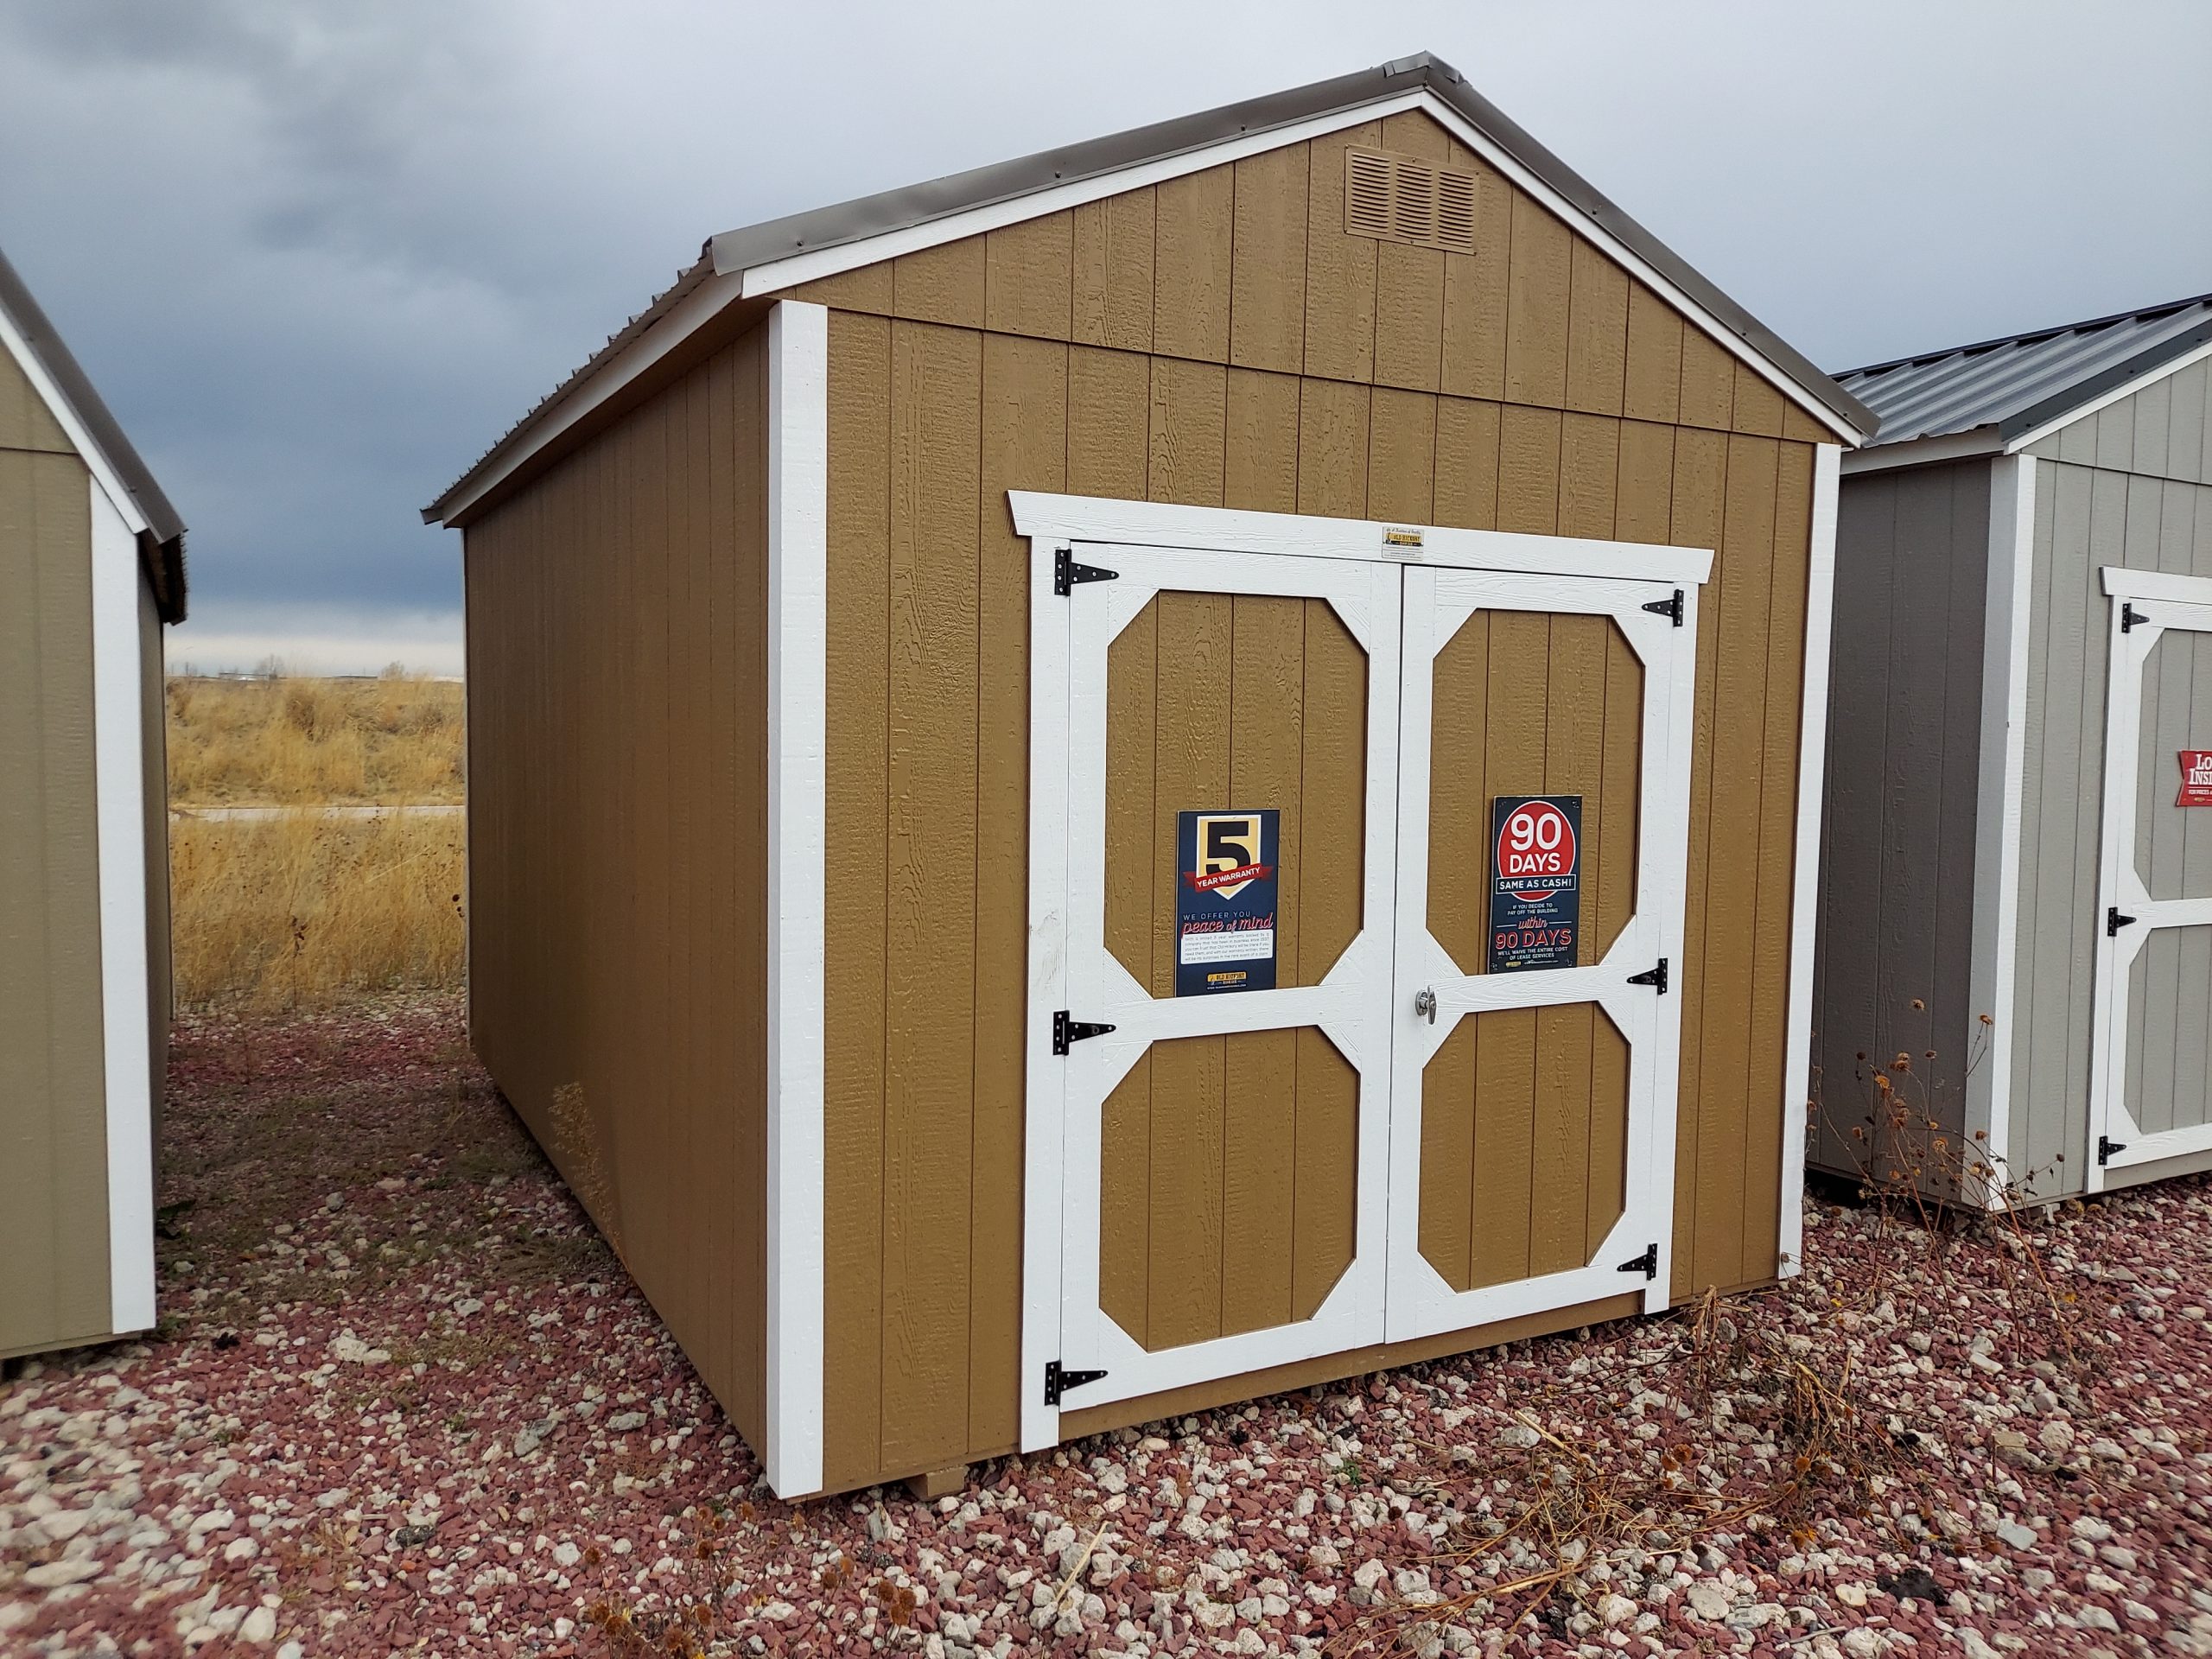 Buy Now: 10×16 Utility Shed For Sale Buckskin Paint White Trim or Custom Order at French Creek Design Shed Sales in Casper, WY